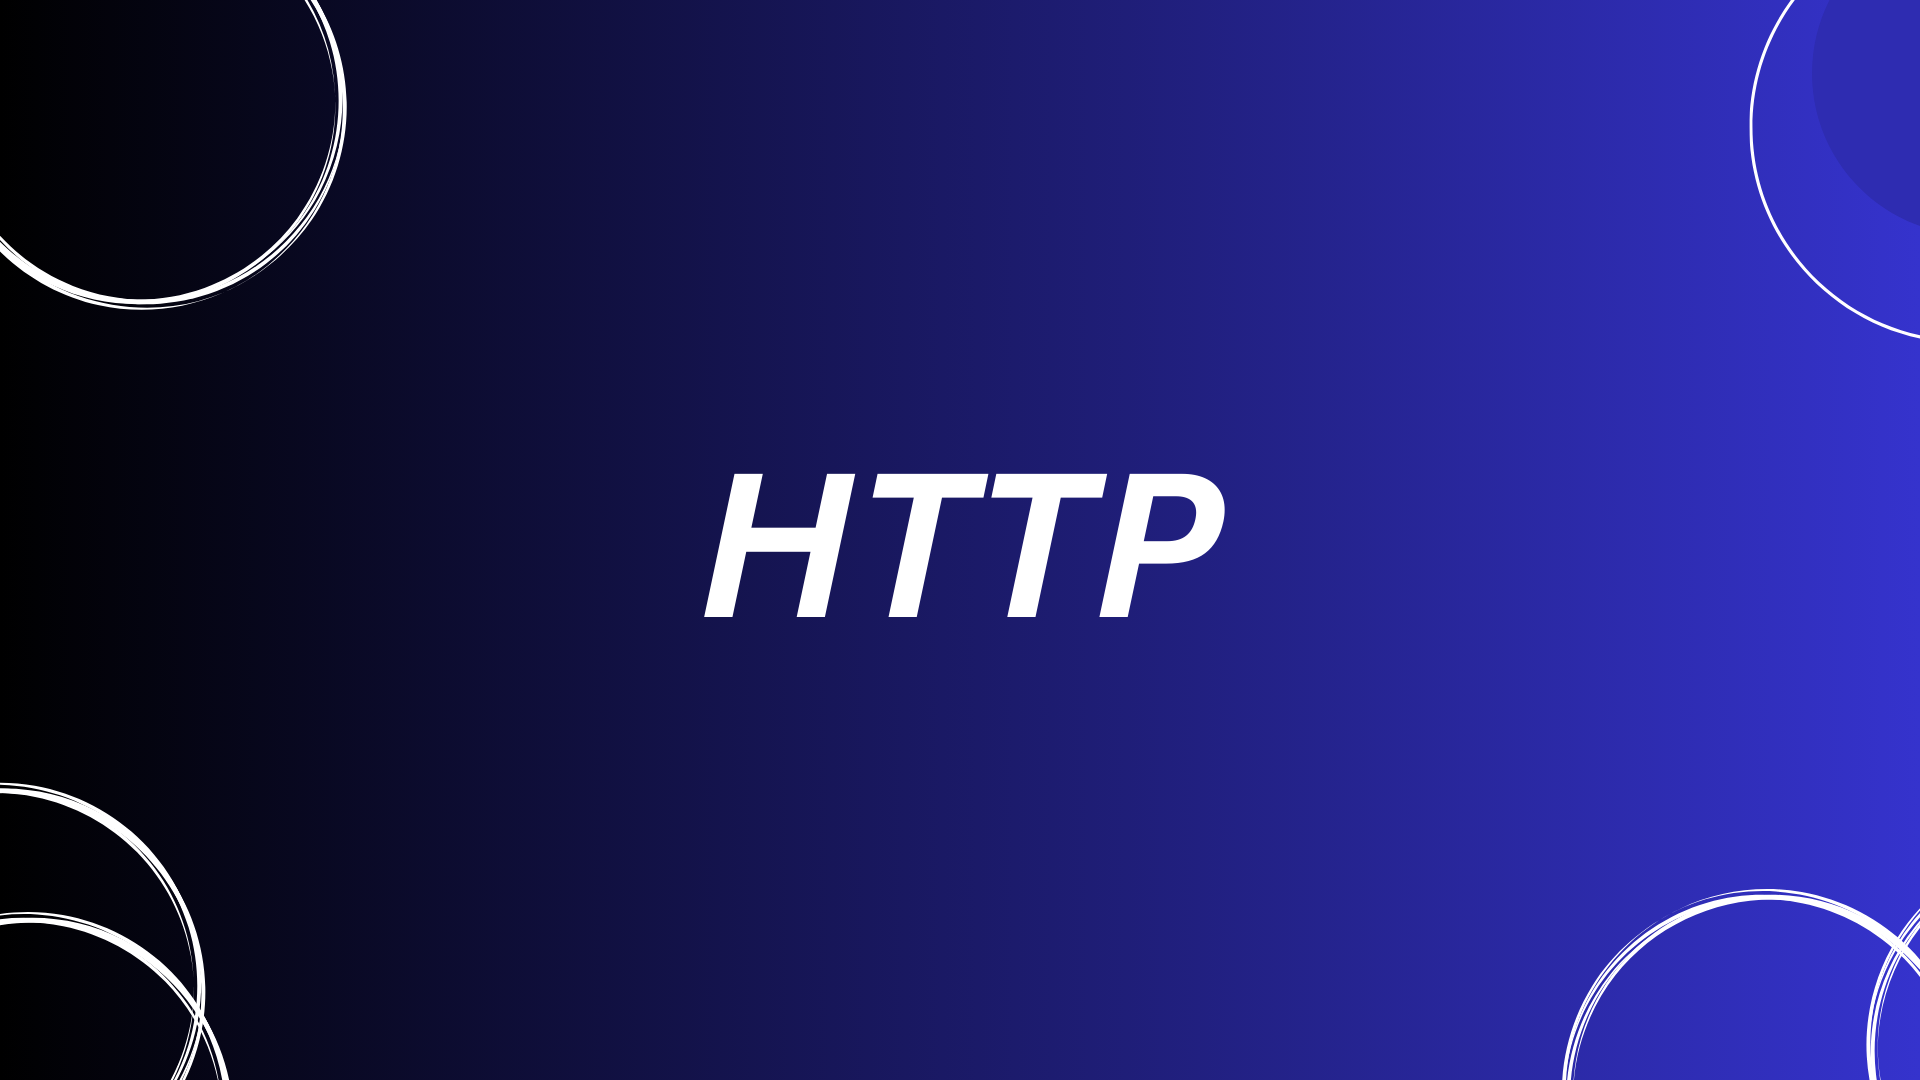 You are currently viewing Exploring the Dynamic World of HTTP: From Cookies to DDoS Attacks